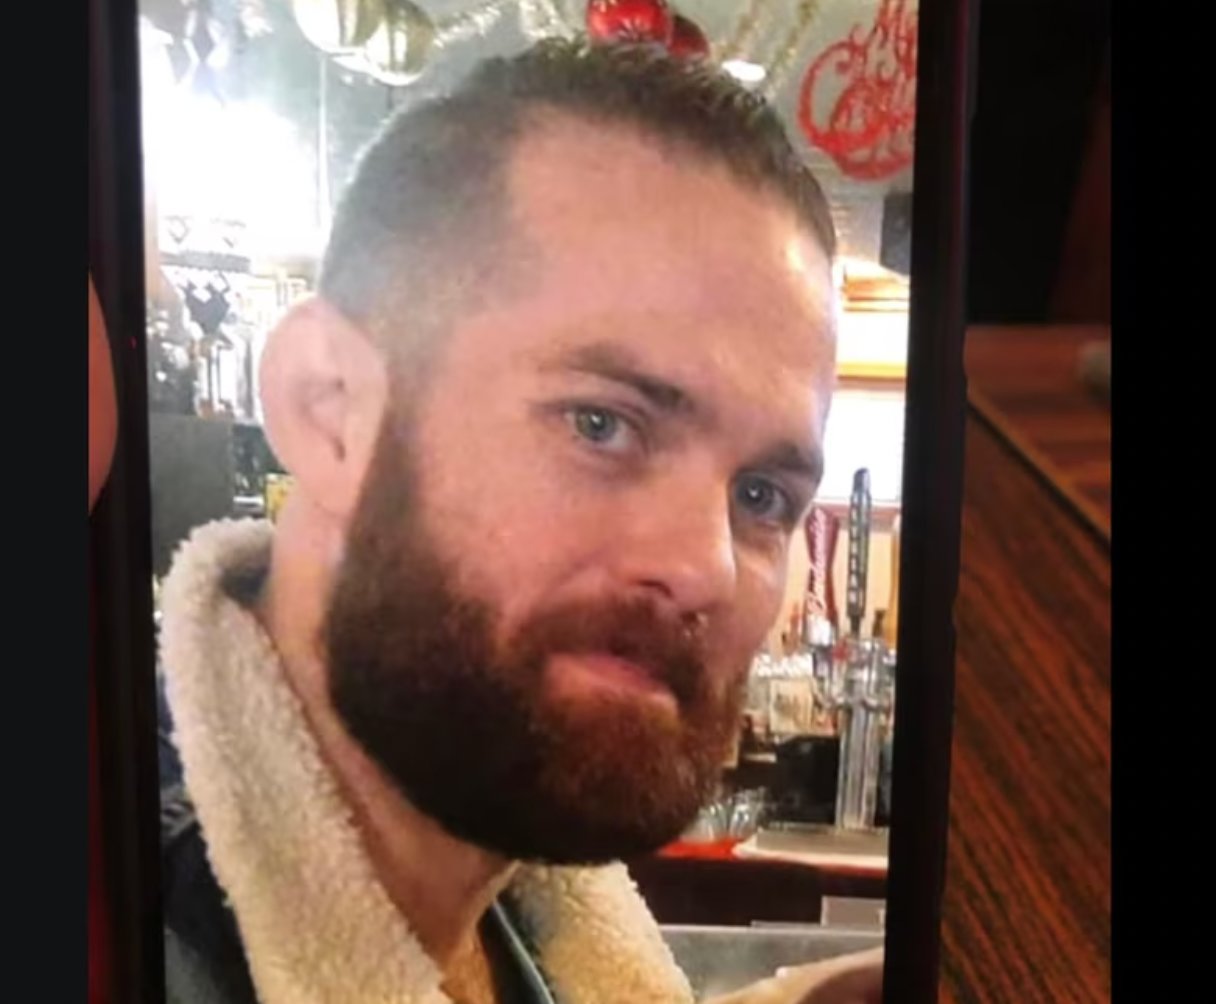 Benjamin Foster, suspected in horrific attack on 35-year-old woman, died of a self-inflicted gunshot wound Tuesday night.